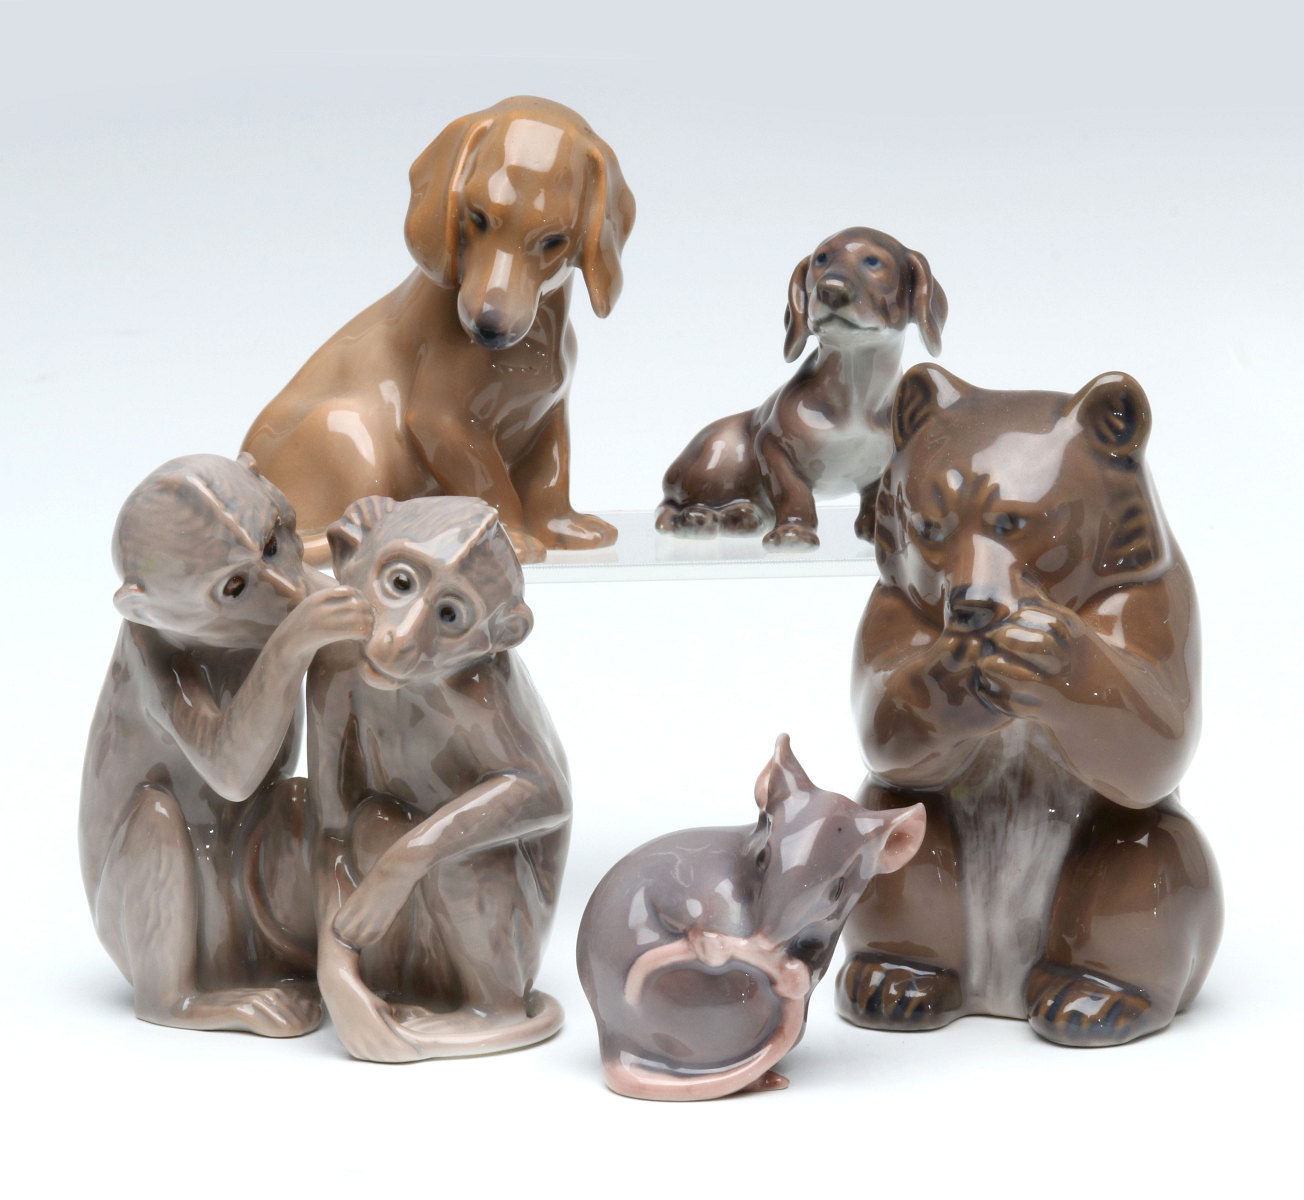 A COLLECTION OF DANISH PORCELAIN ANIMAL FIGURES